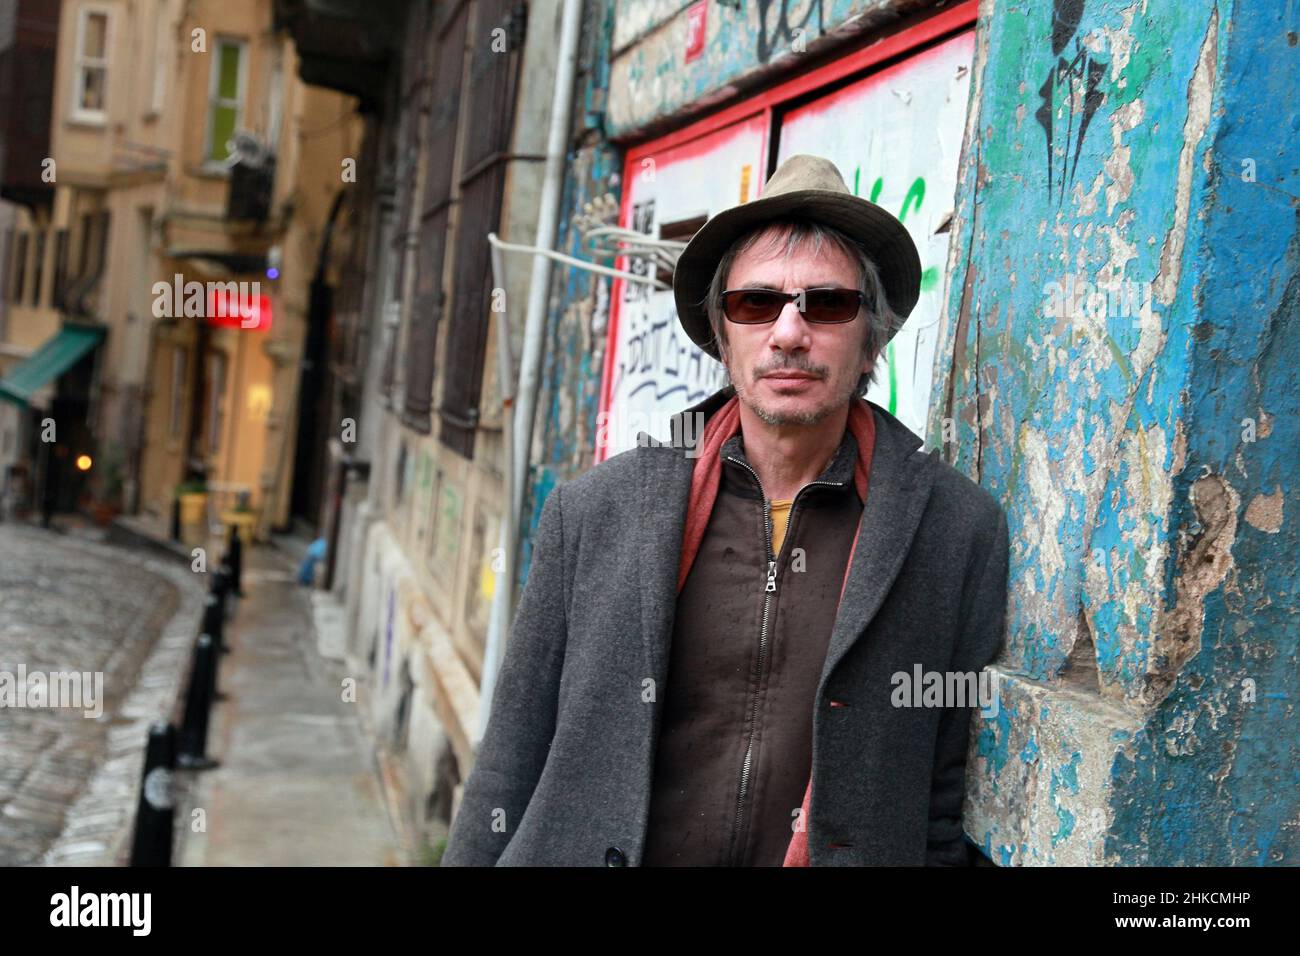 ISTANBUL, TURKEY - FEBRUARY 15: French film director, critic, and writer Alex Christophe Dupont, best known as Leos Carax portrait on February 15, 2013 in Istanbul, Turkey. Stock Photo